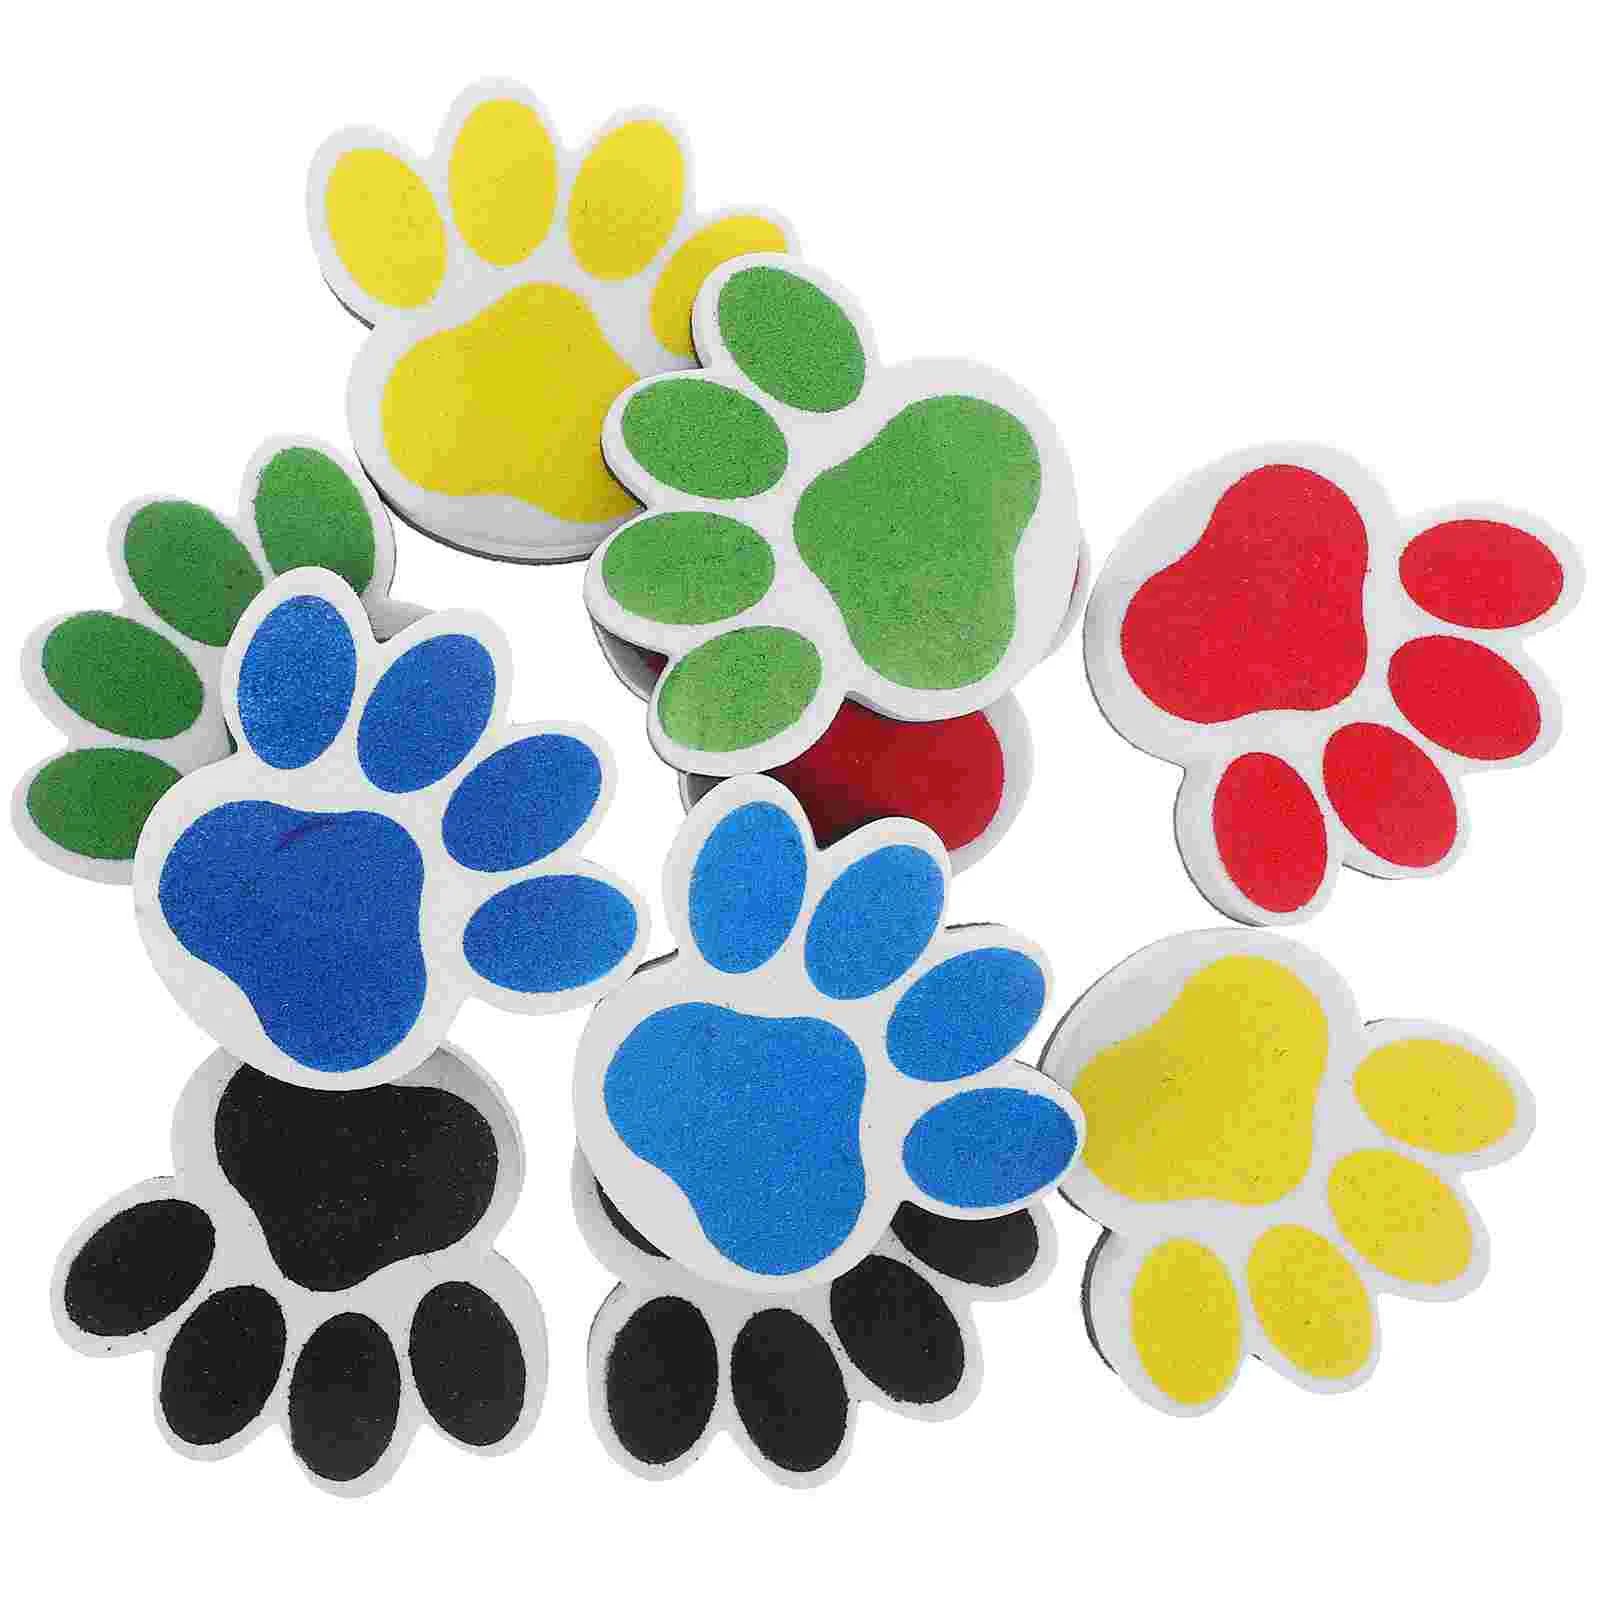 

Magnetic White Board Erasers 10Pcs Paw Print Dry Erase Eraser Chalkboard Cleaner Cartoon Whiteboard Erasers Classroom